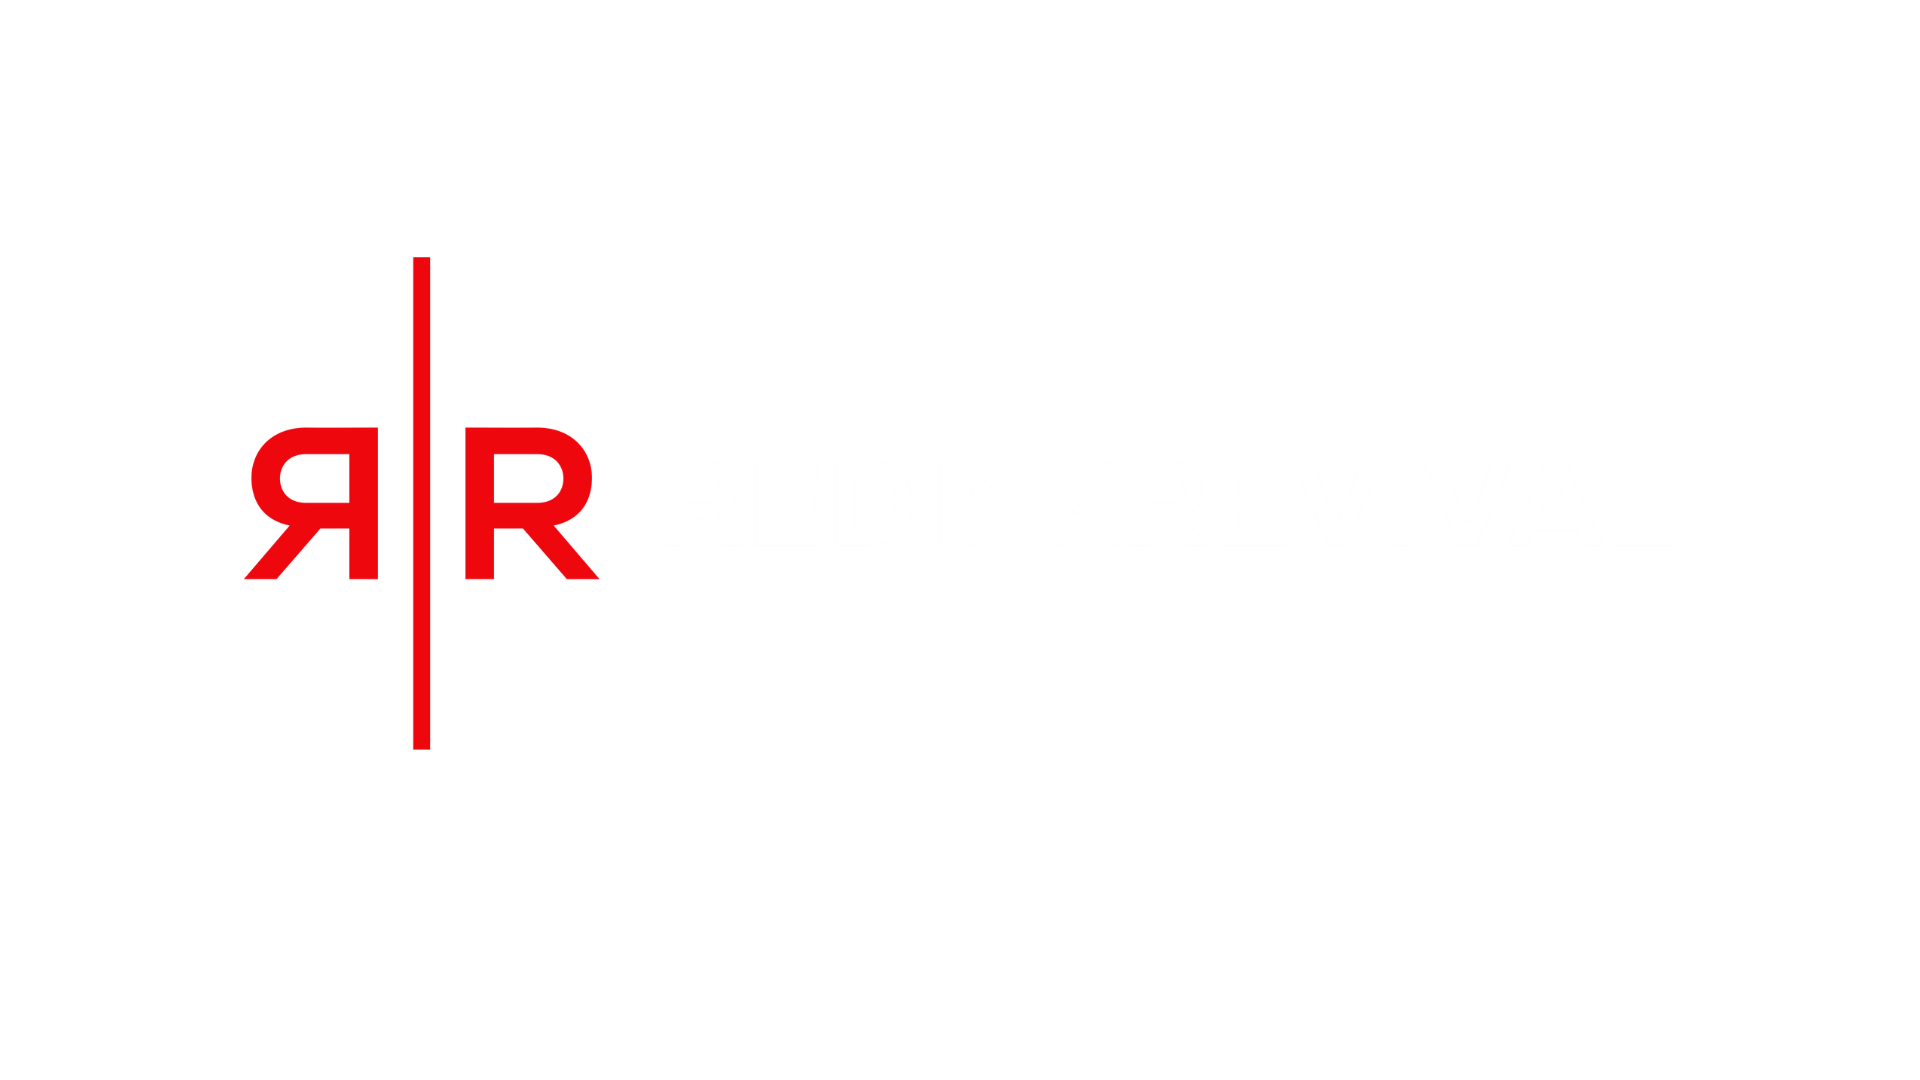 RED INK REVIVAL